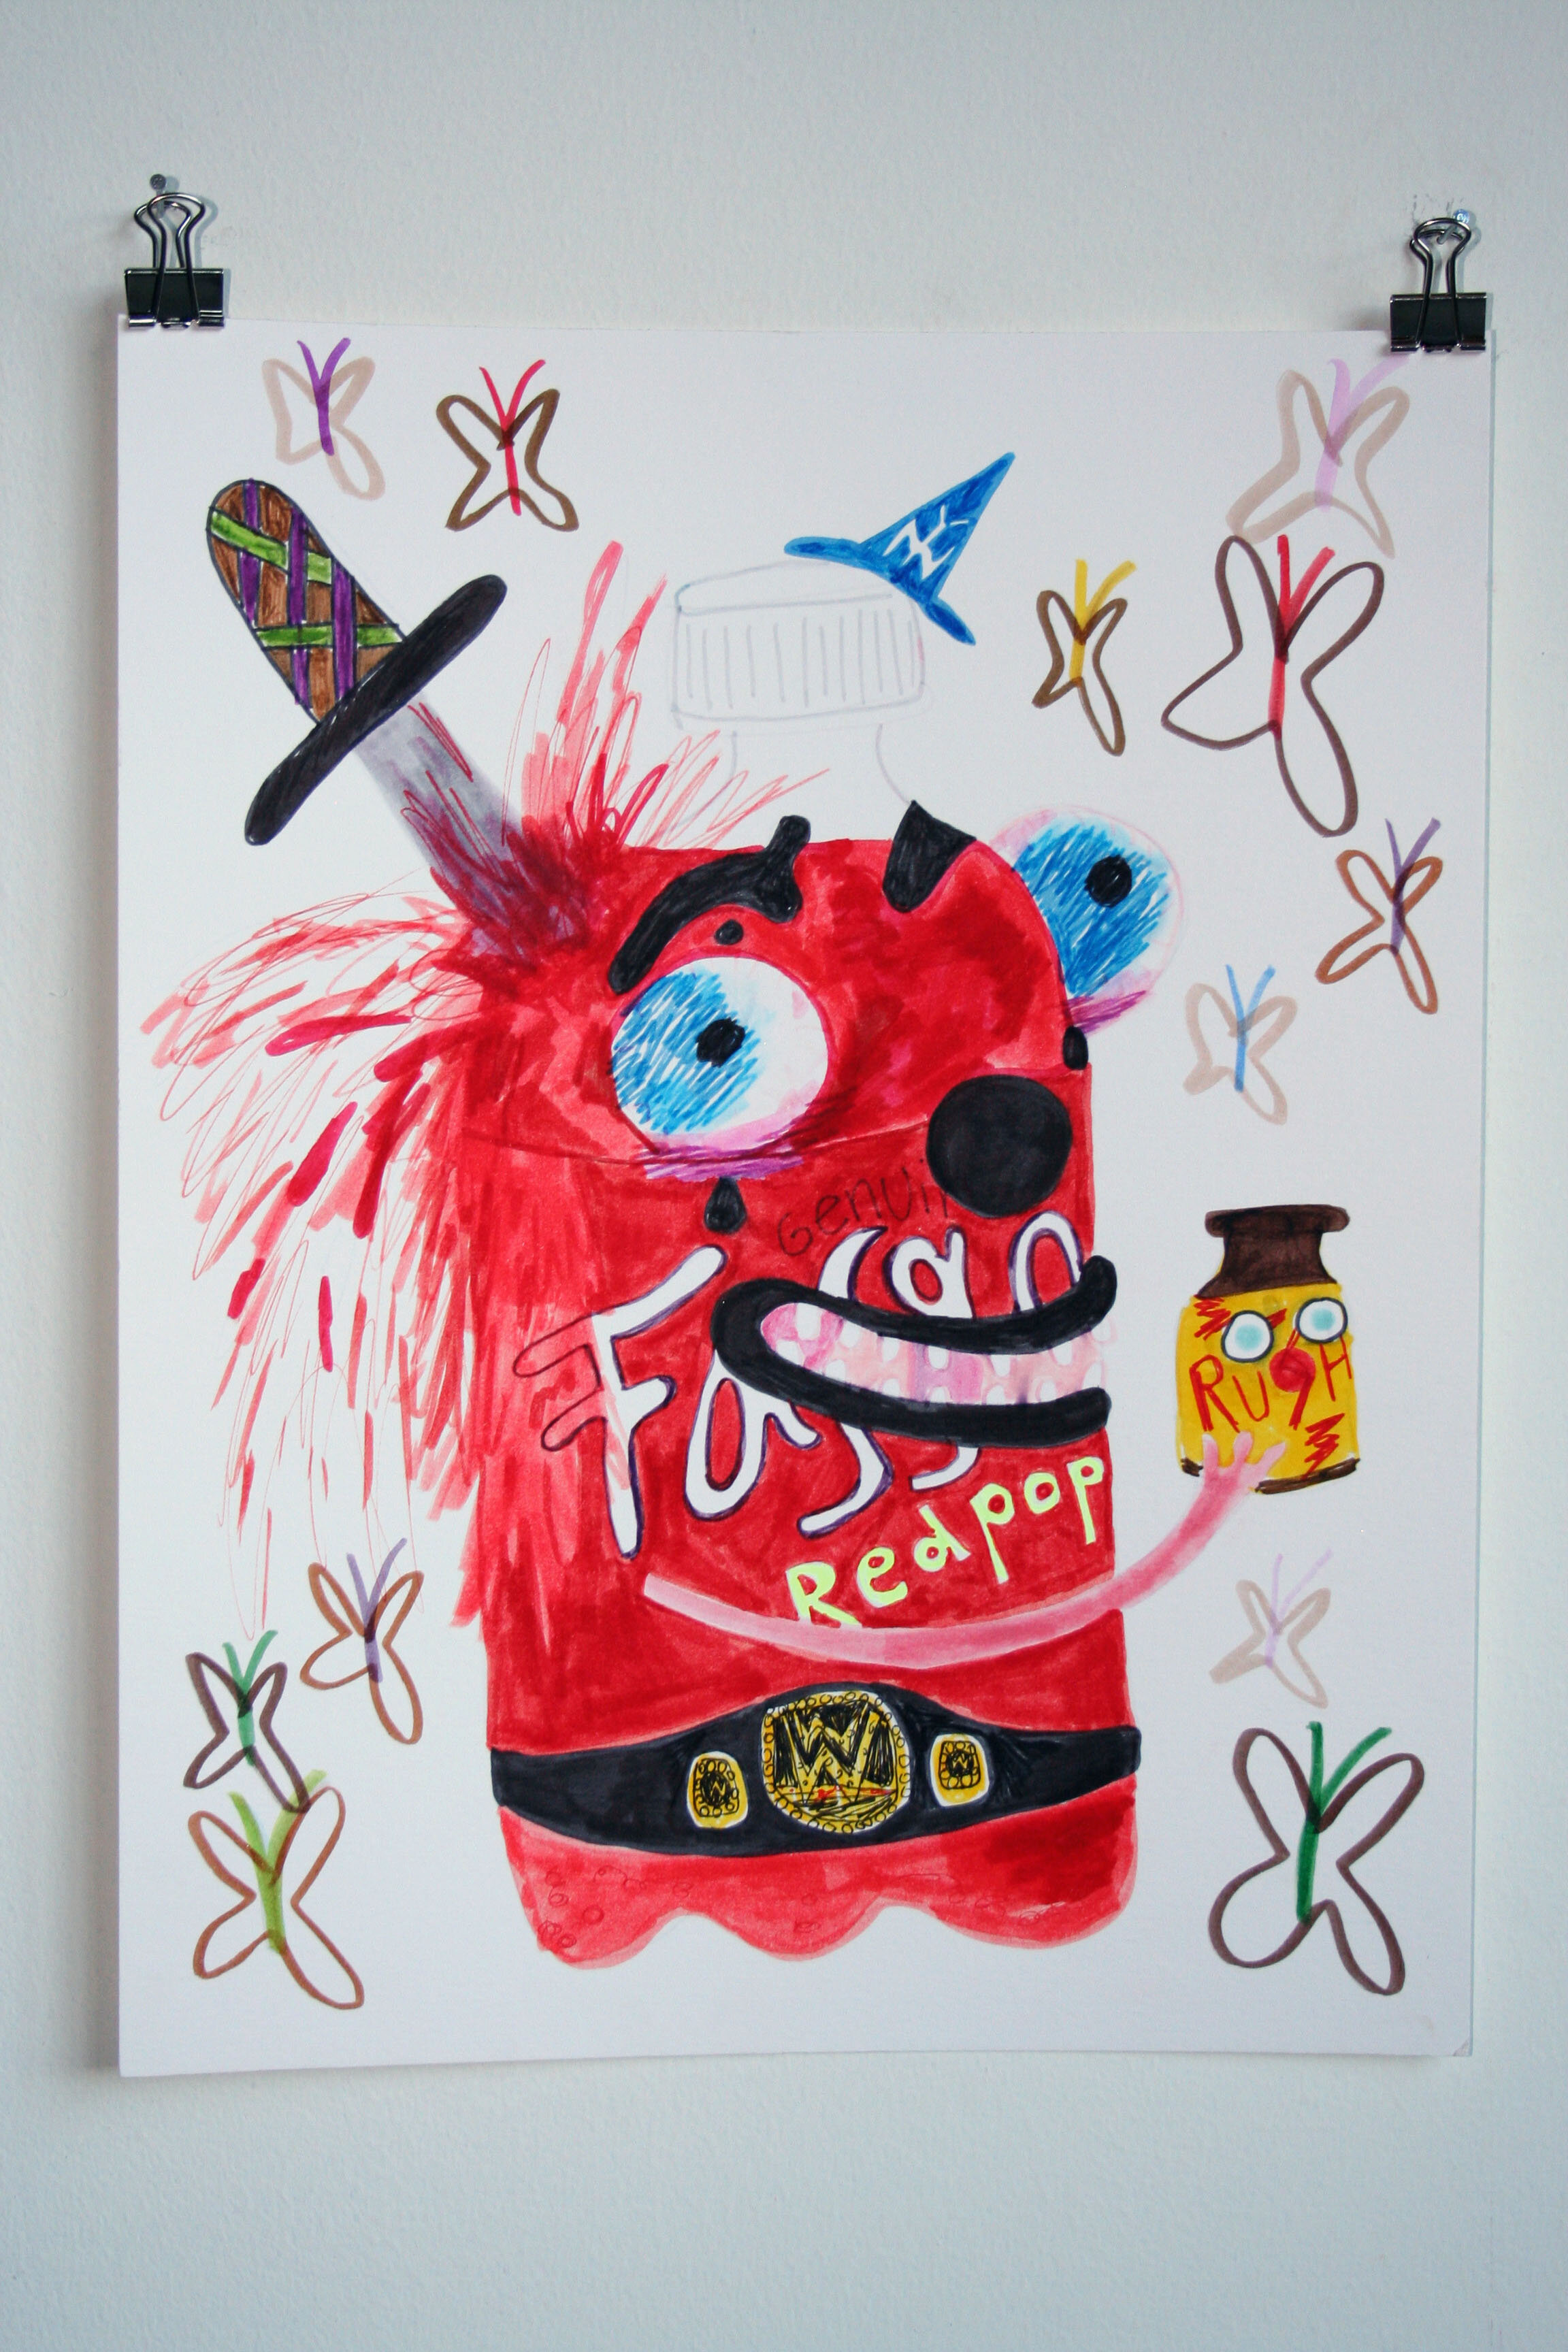   The Red Pop Puppet Loves Poppers,  2015  14 x 11 inches (35.56 x 27.94 cm.)  Marker on paper  Private collection, Zürich 